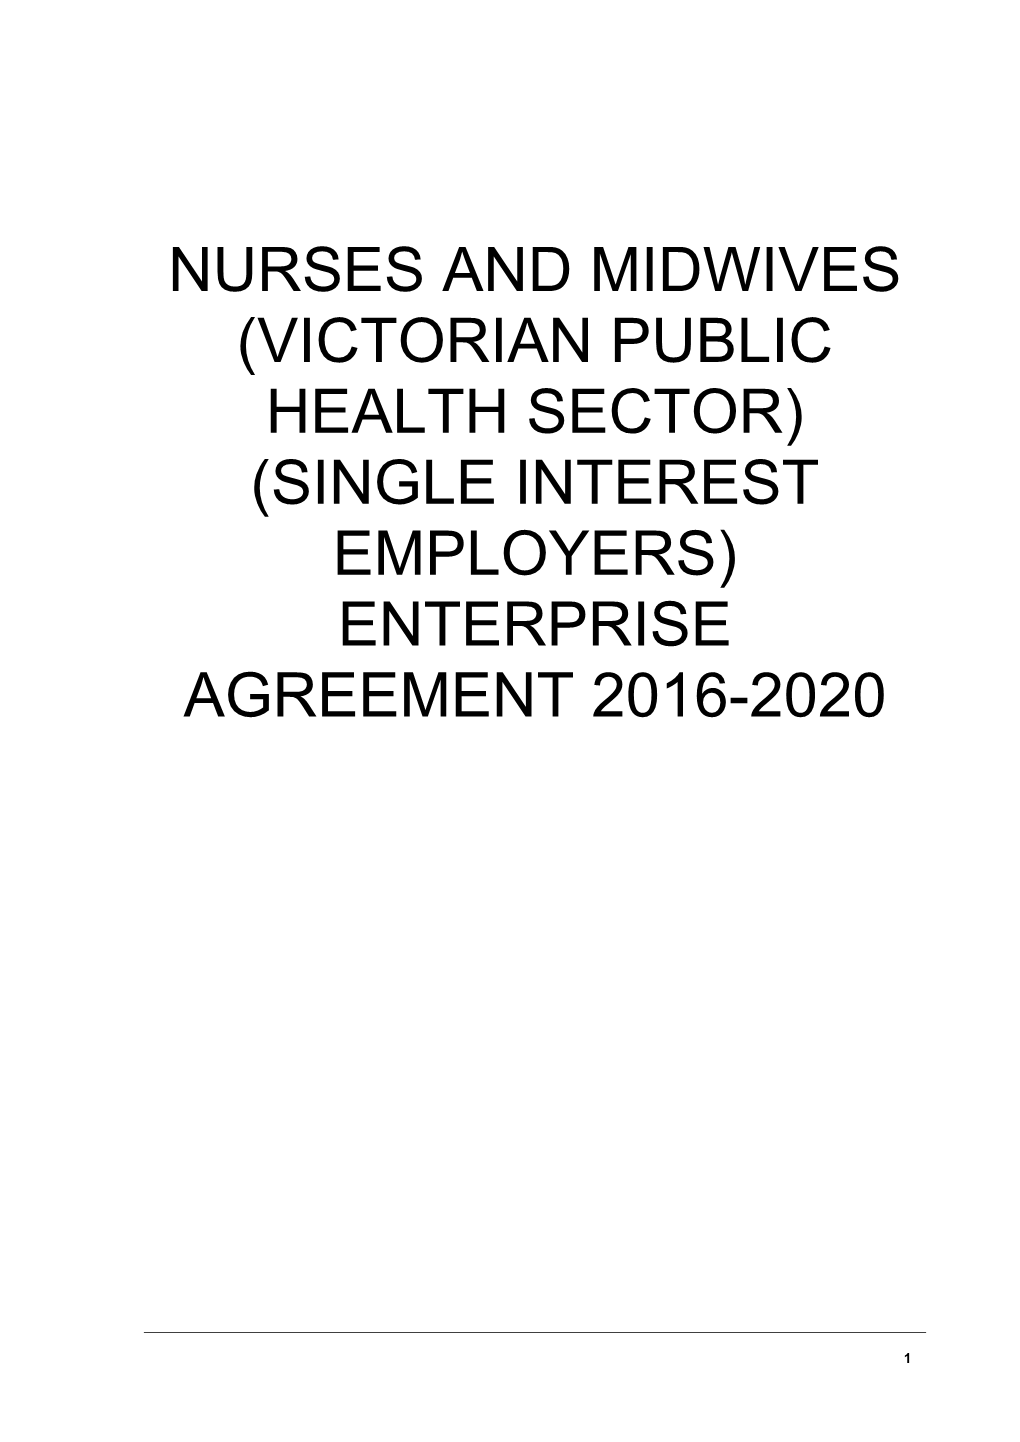 Nurses and Midwives (Victorian Public Health Sector) (Single Interest Employers) Enterprise Agreement 2016-2020